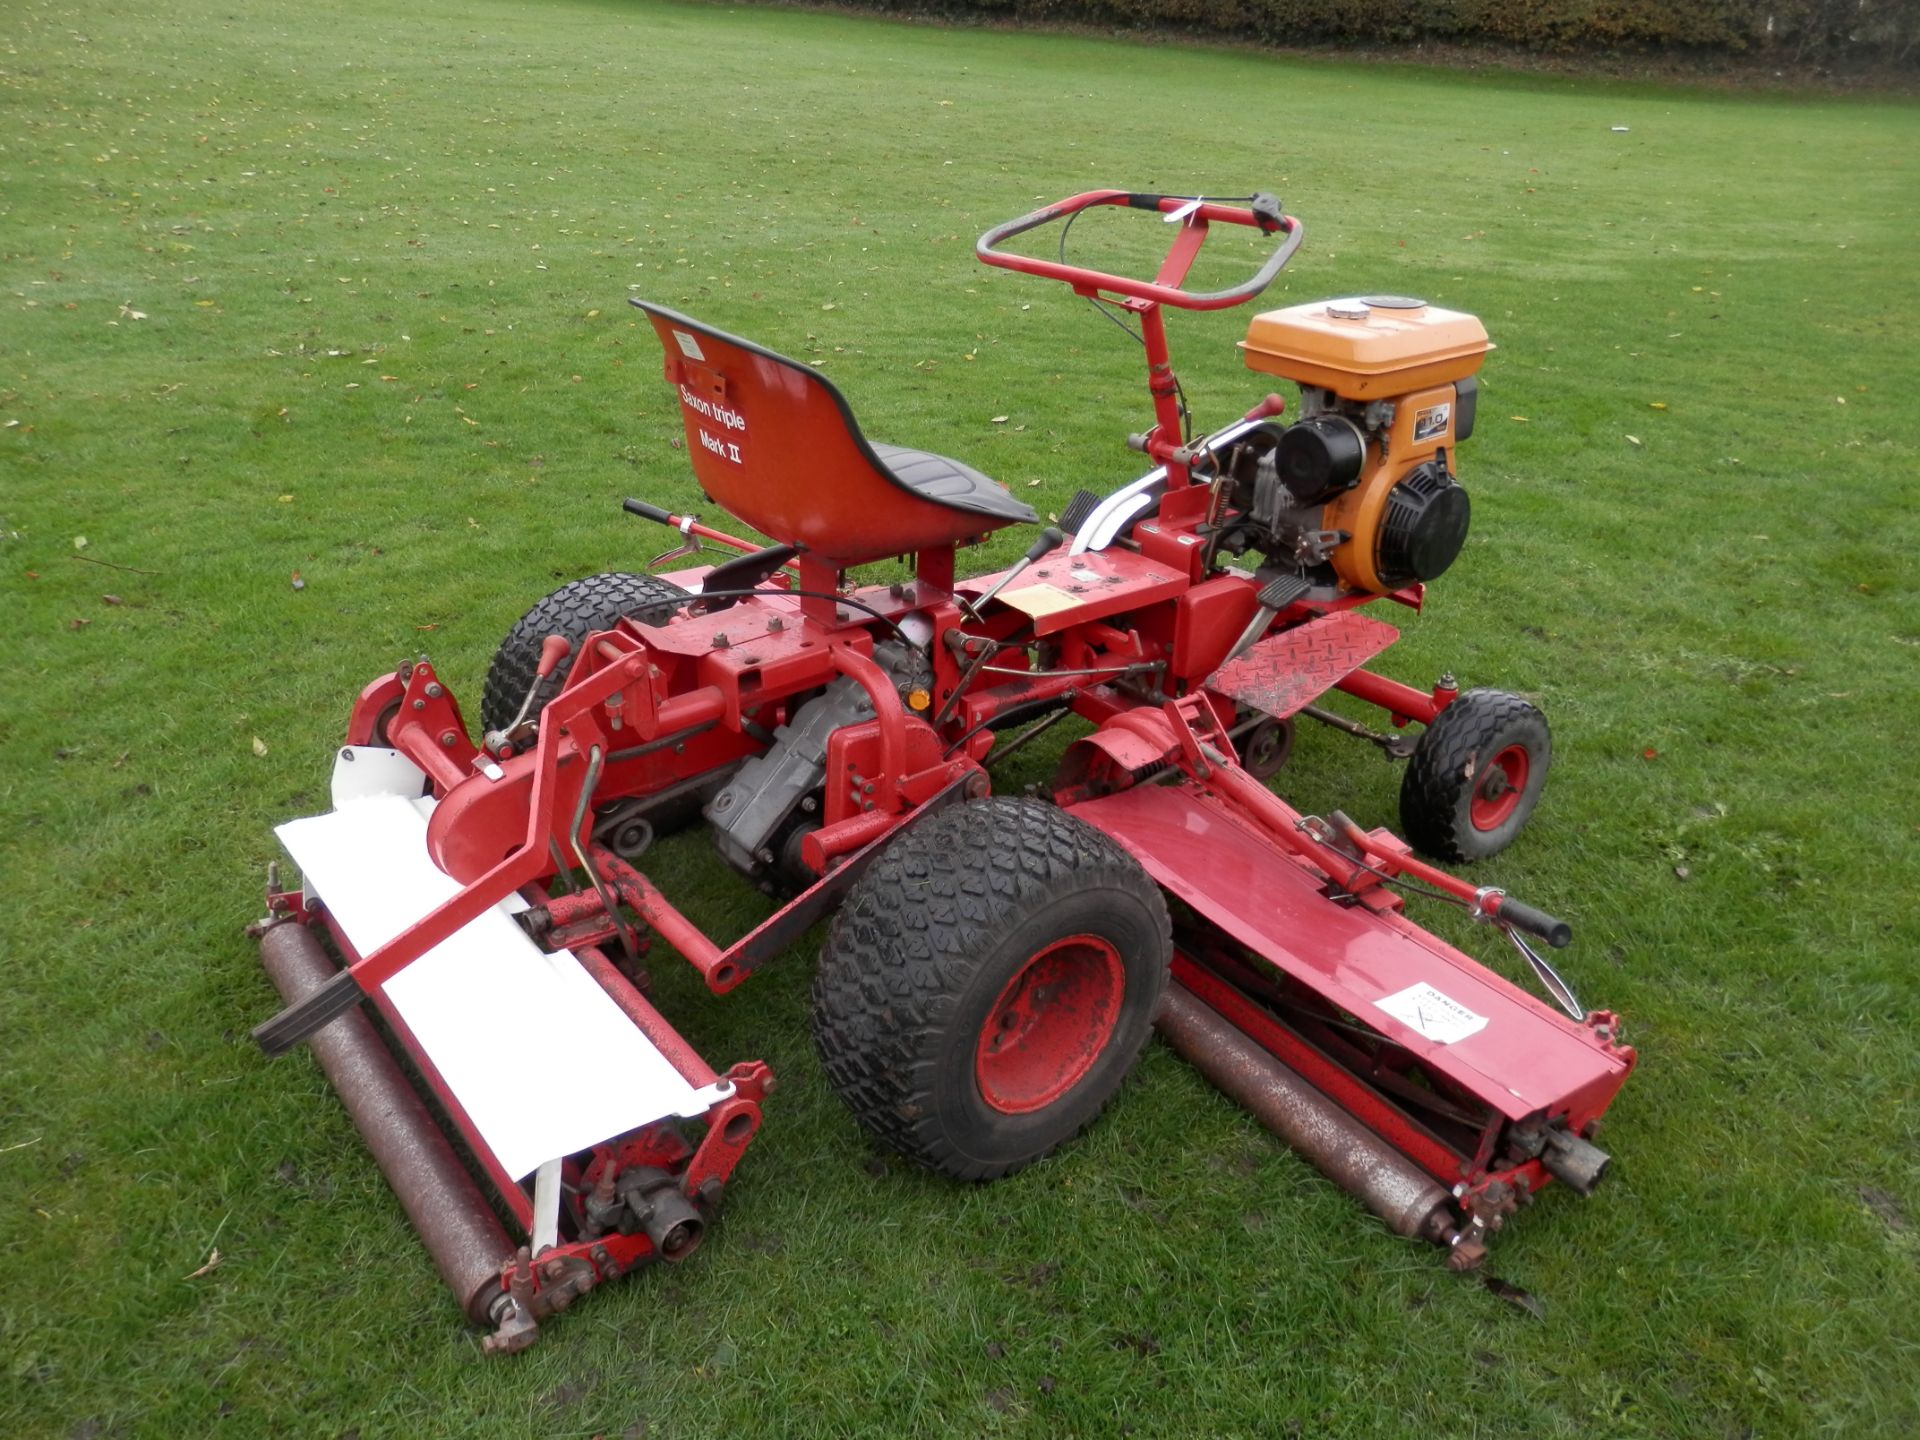 ALL WORKING SAXON TRIPLE MK2 RIDE ON MOWER, UPGRADED WITH GEARS, BRAKE PEDAL & DIFF LOCK. - Image 10 of 14